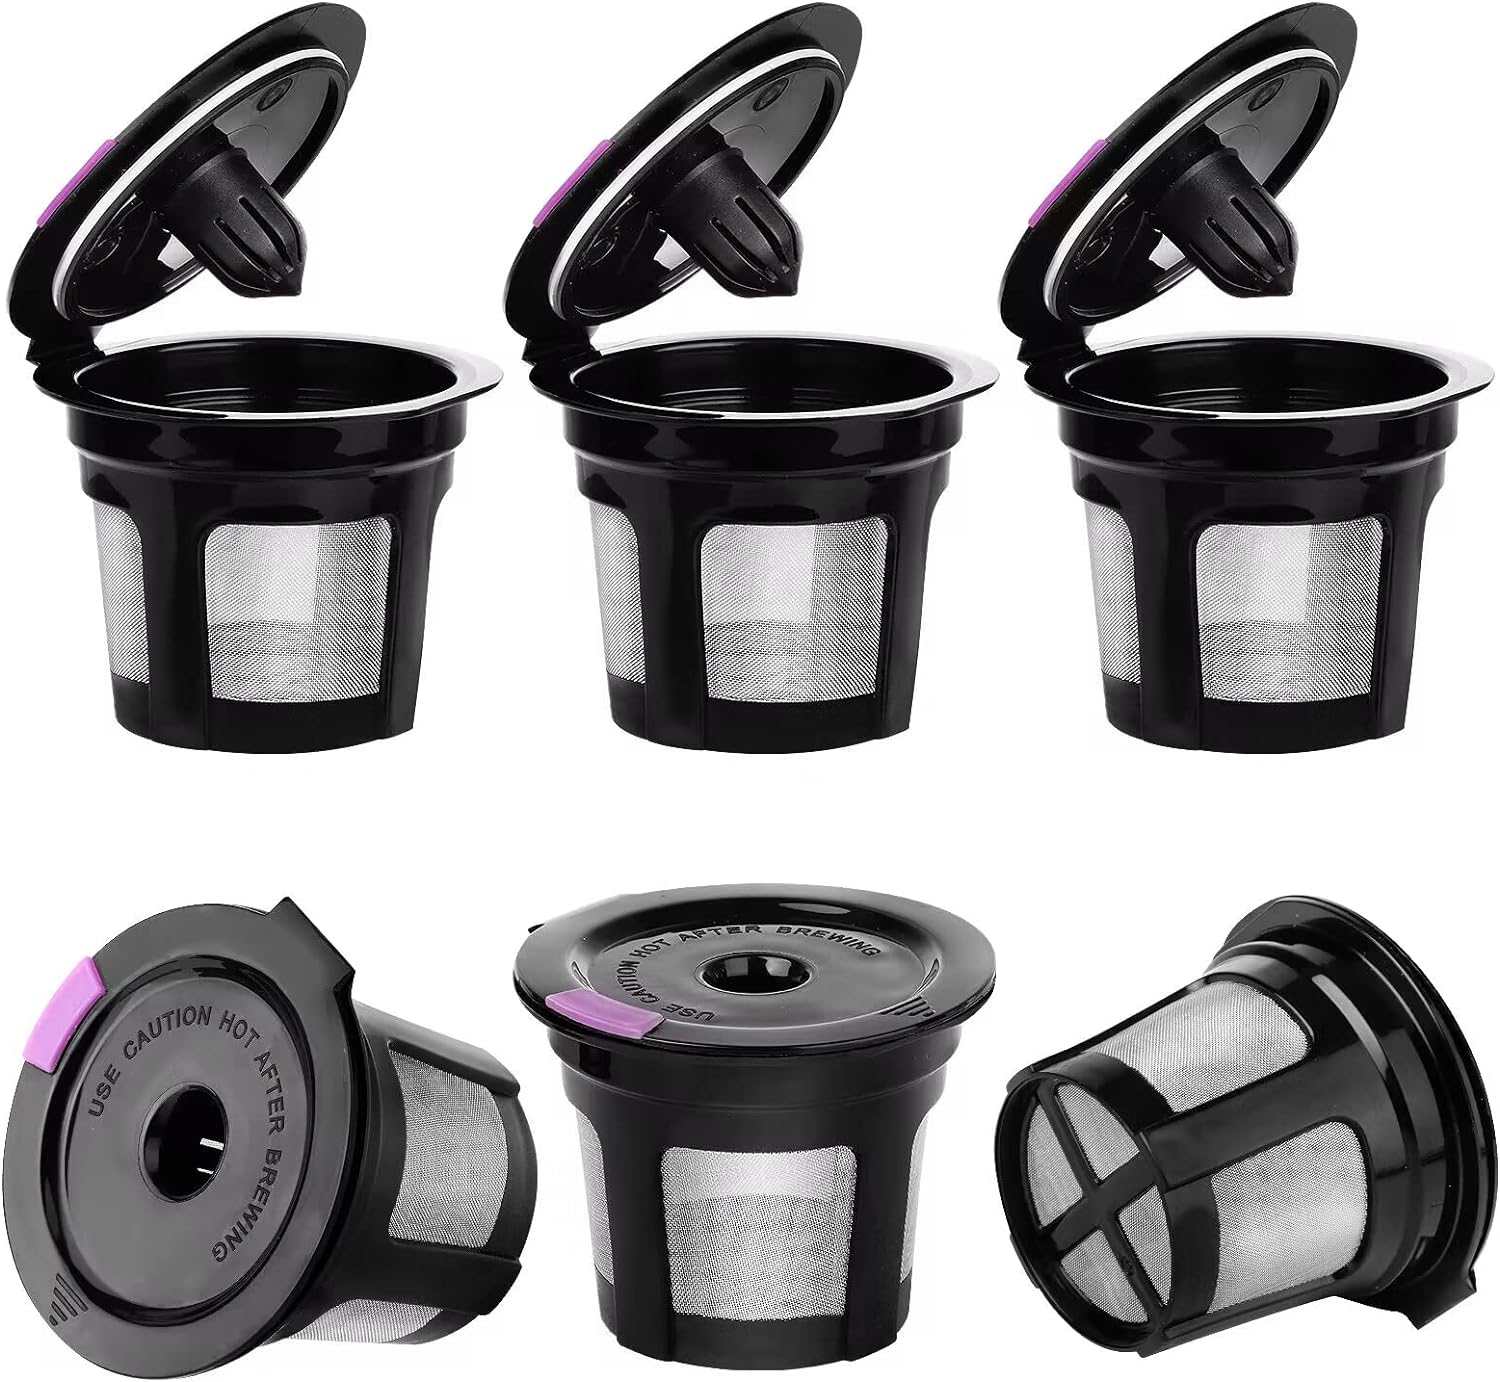 Reusable K Cups for Keurig, 6 Pack K Cup Reusable Coffee Pods with BPA Free Plastic, Refillable K Cup Coffe Pods with 304 Mess, Compatible for Keurig 1.0  2.0 Brewers (6-pack)